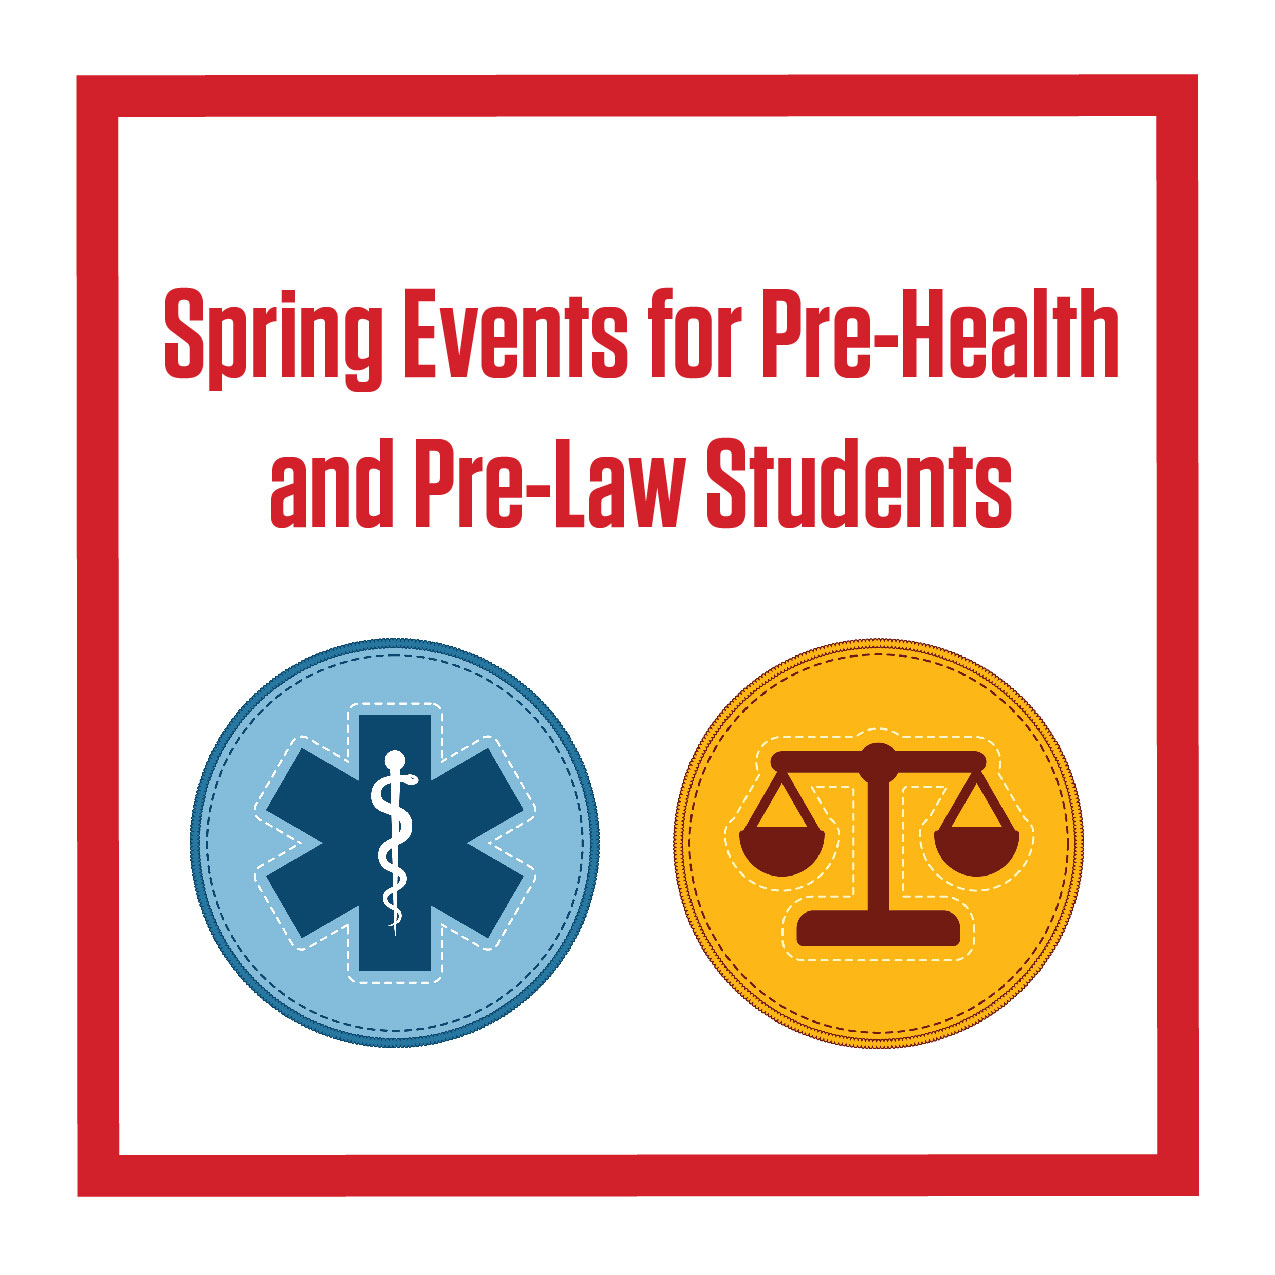 Tell your student about these upcoming events for pre-health and pre-law students.